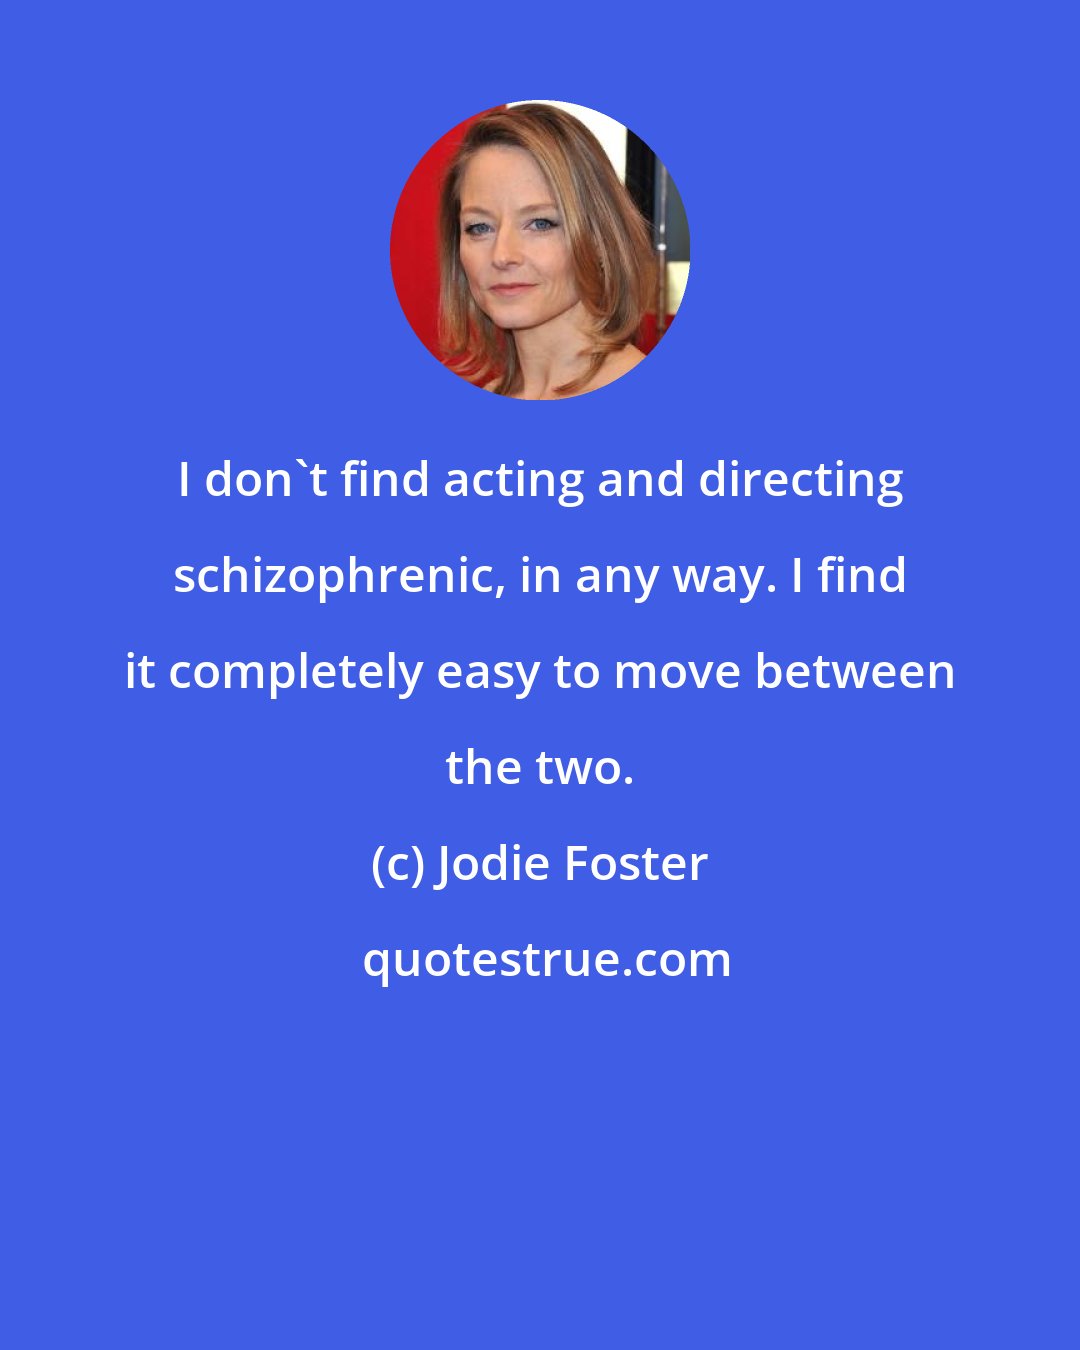 Jodie Foster: I don't find acting and directing schizophrenic, in any way. I find it completely easy to move between the two.